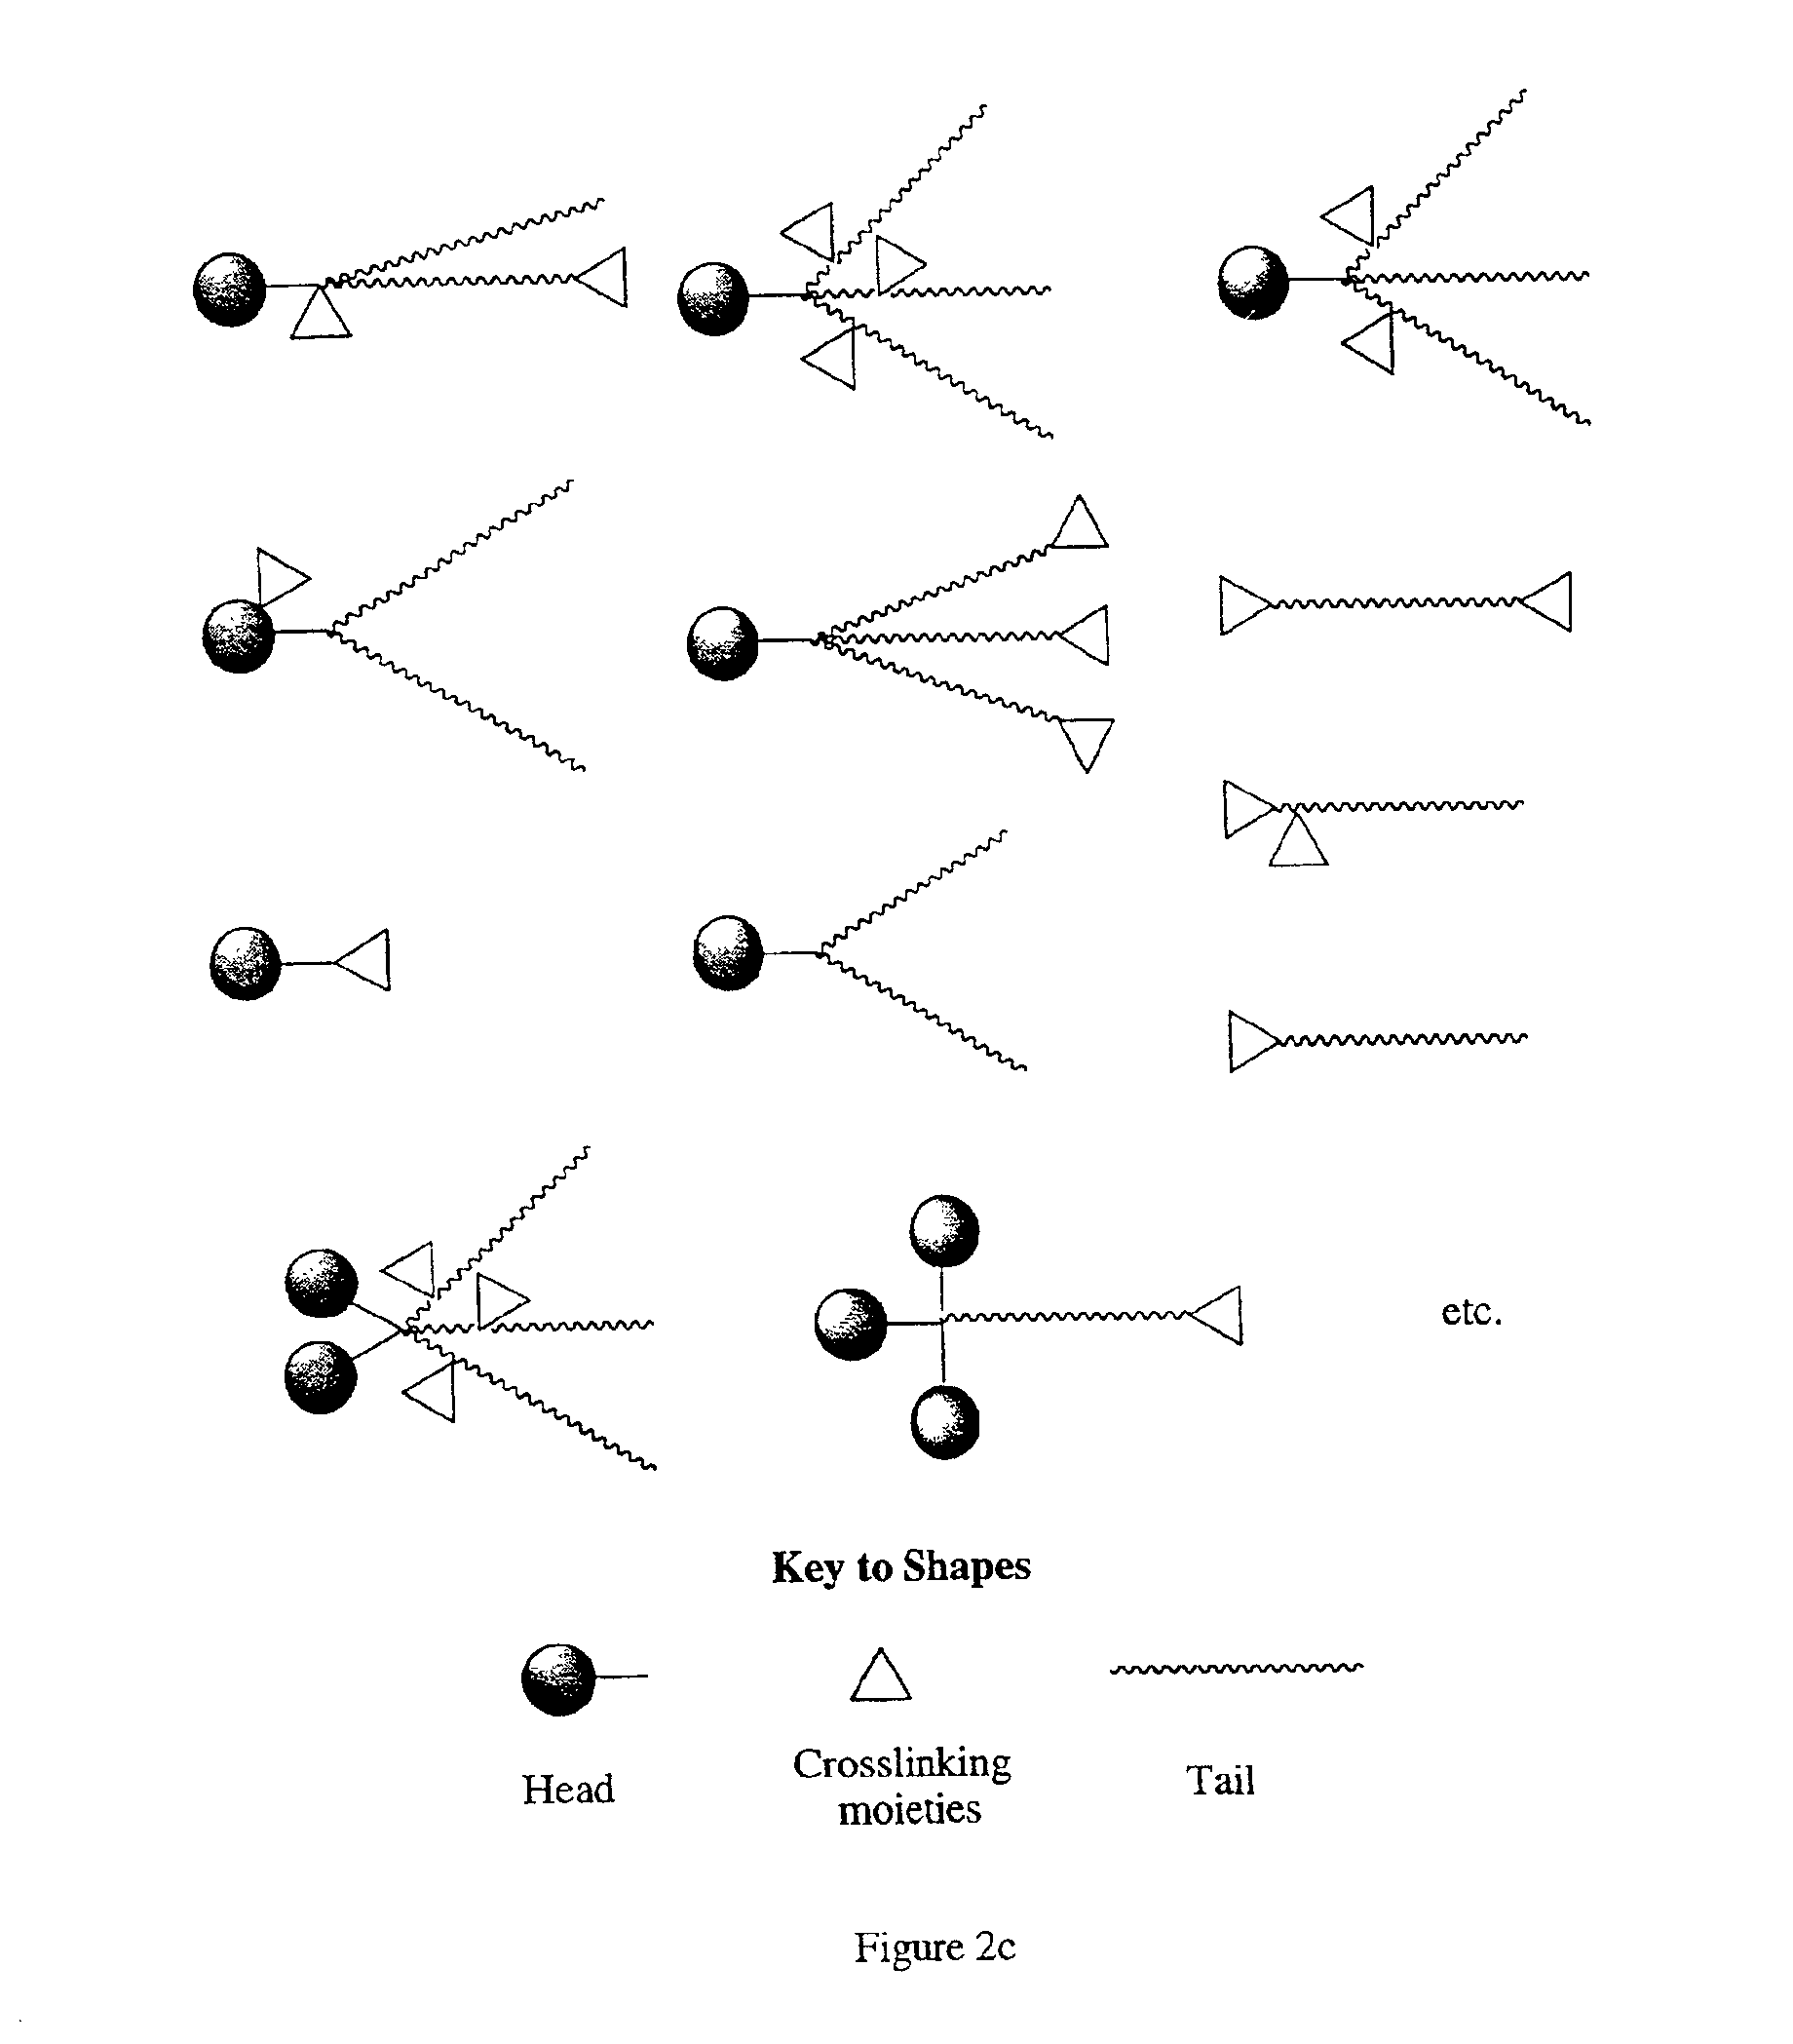 Molecular compounds having complementary surfaces to targets